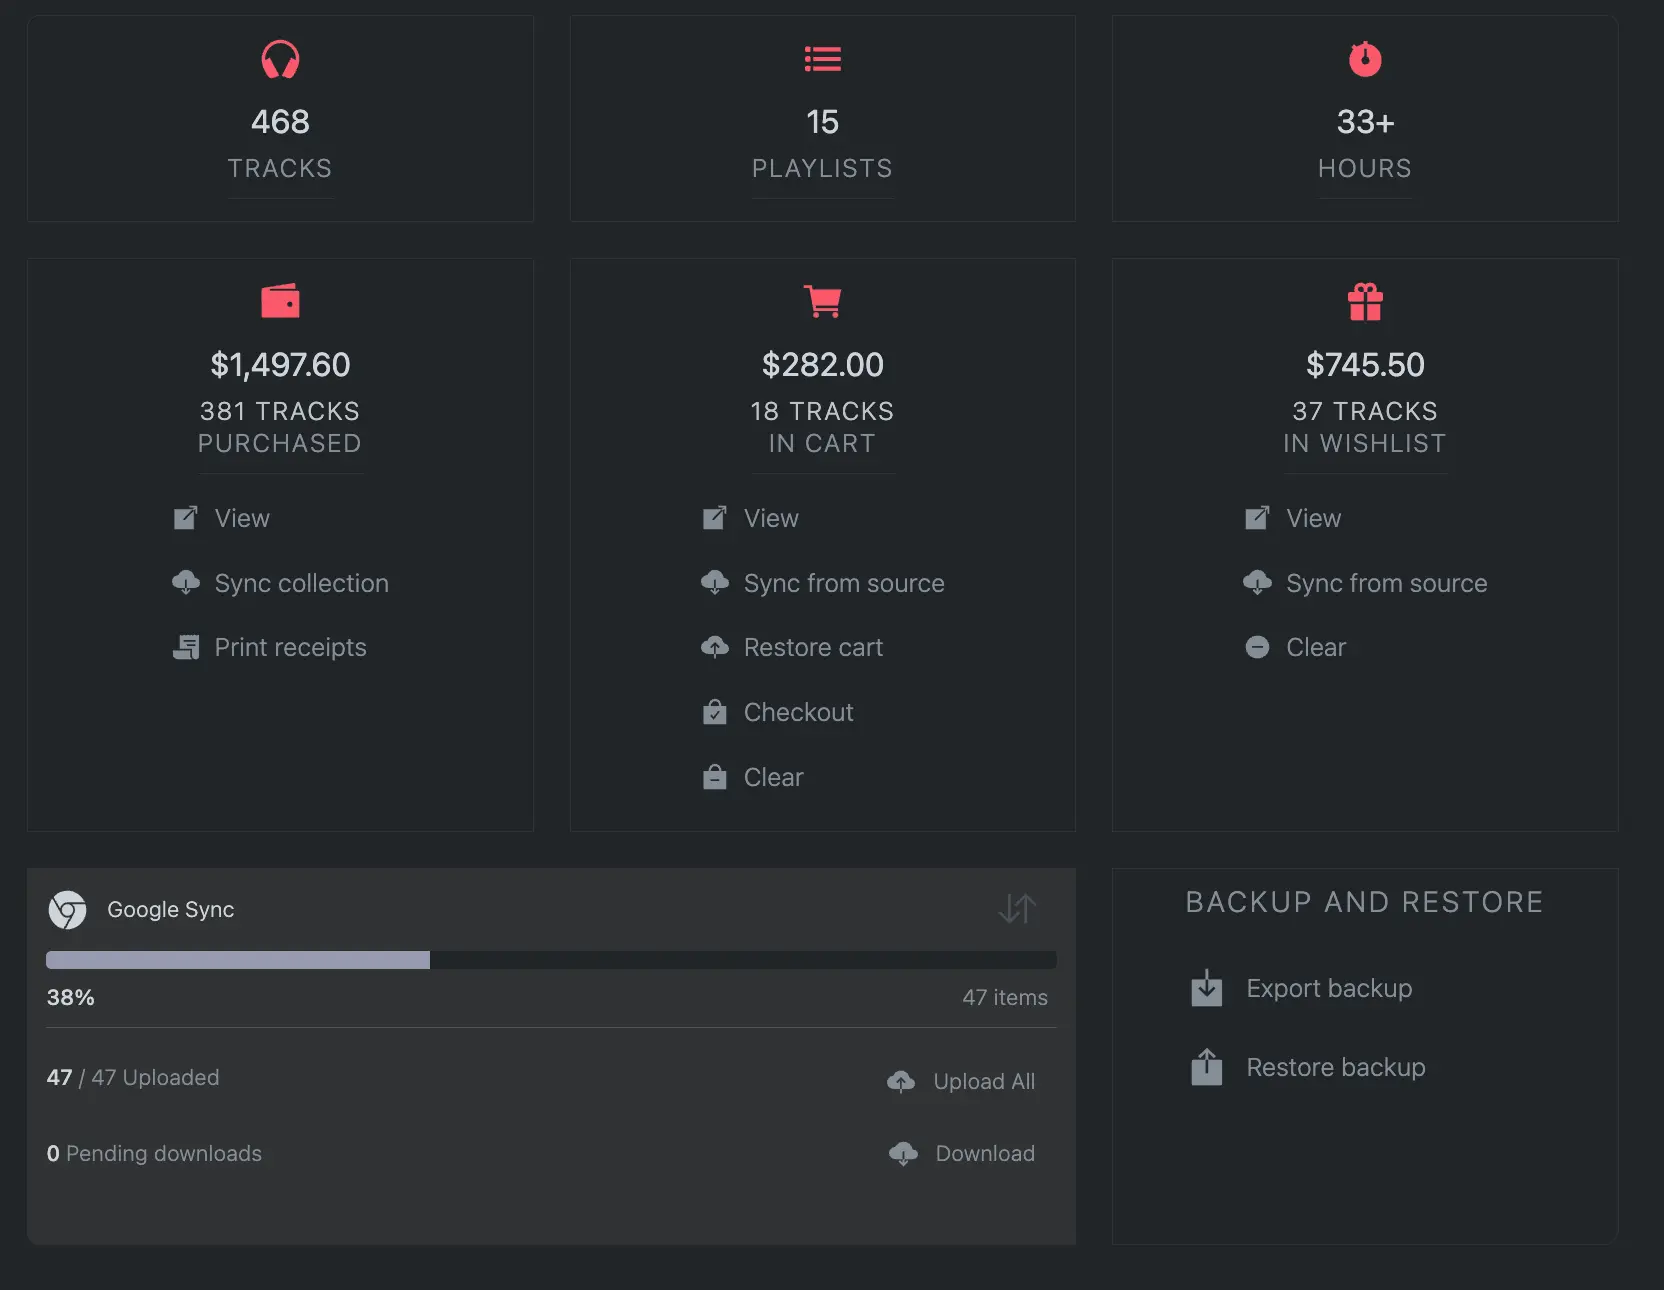 Dashboard view showing all the track counts and price estimates